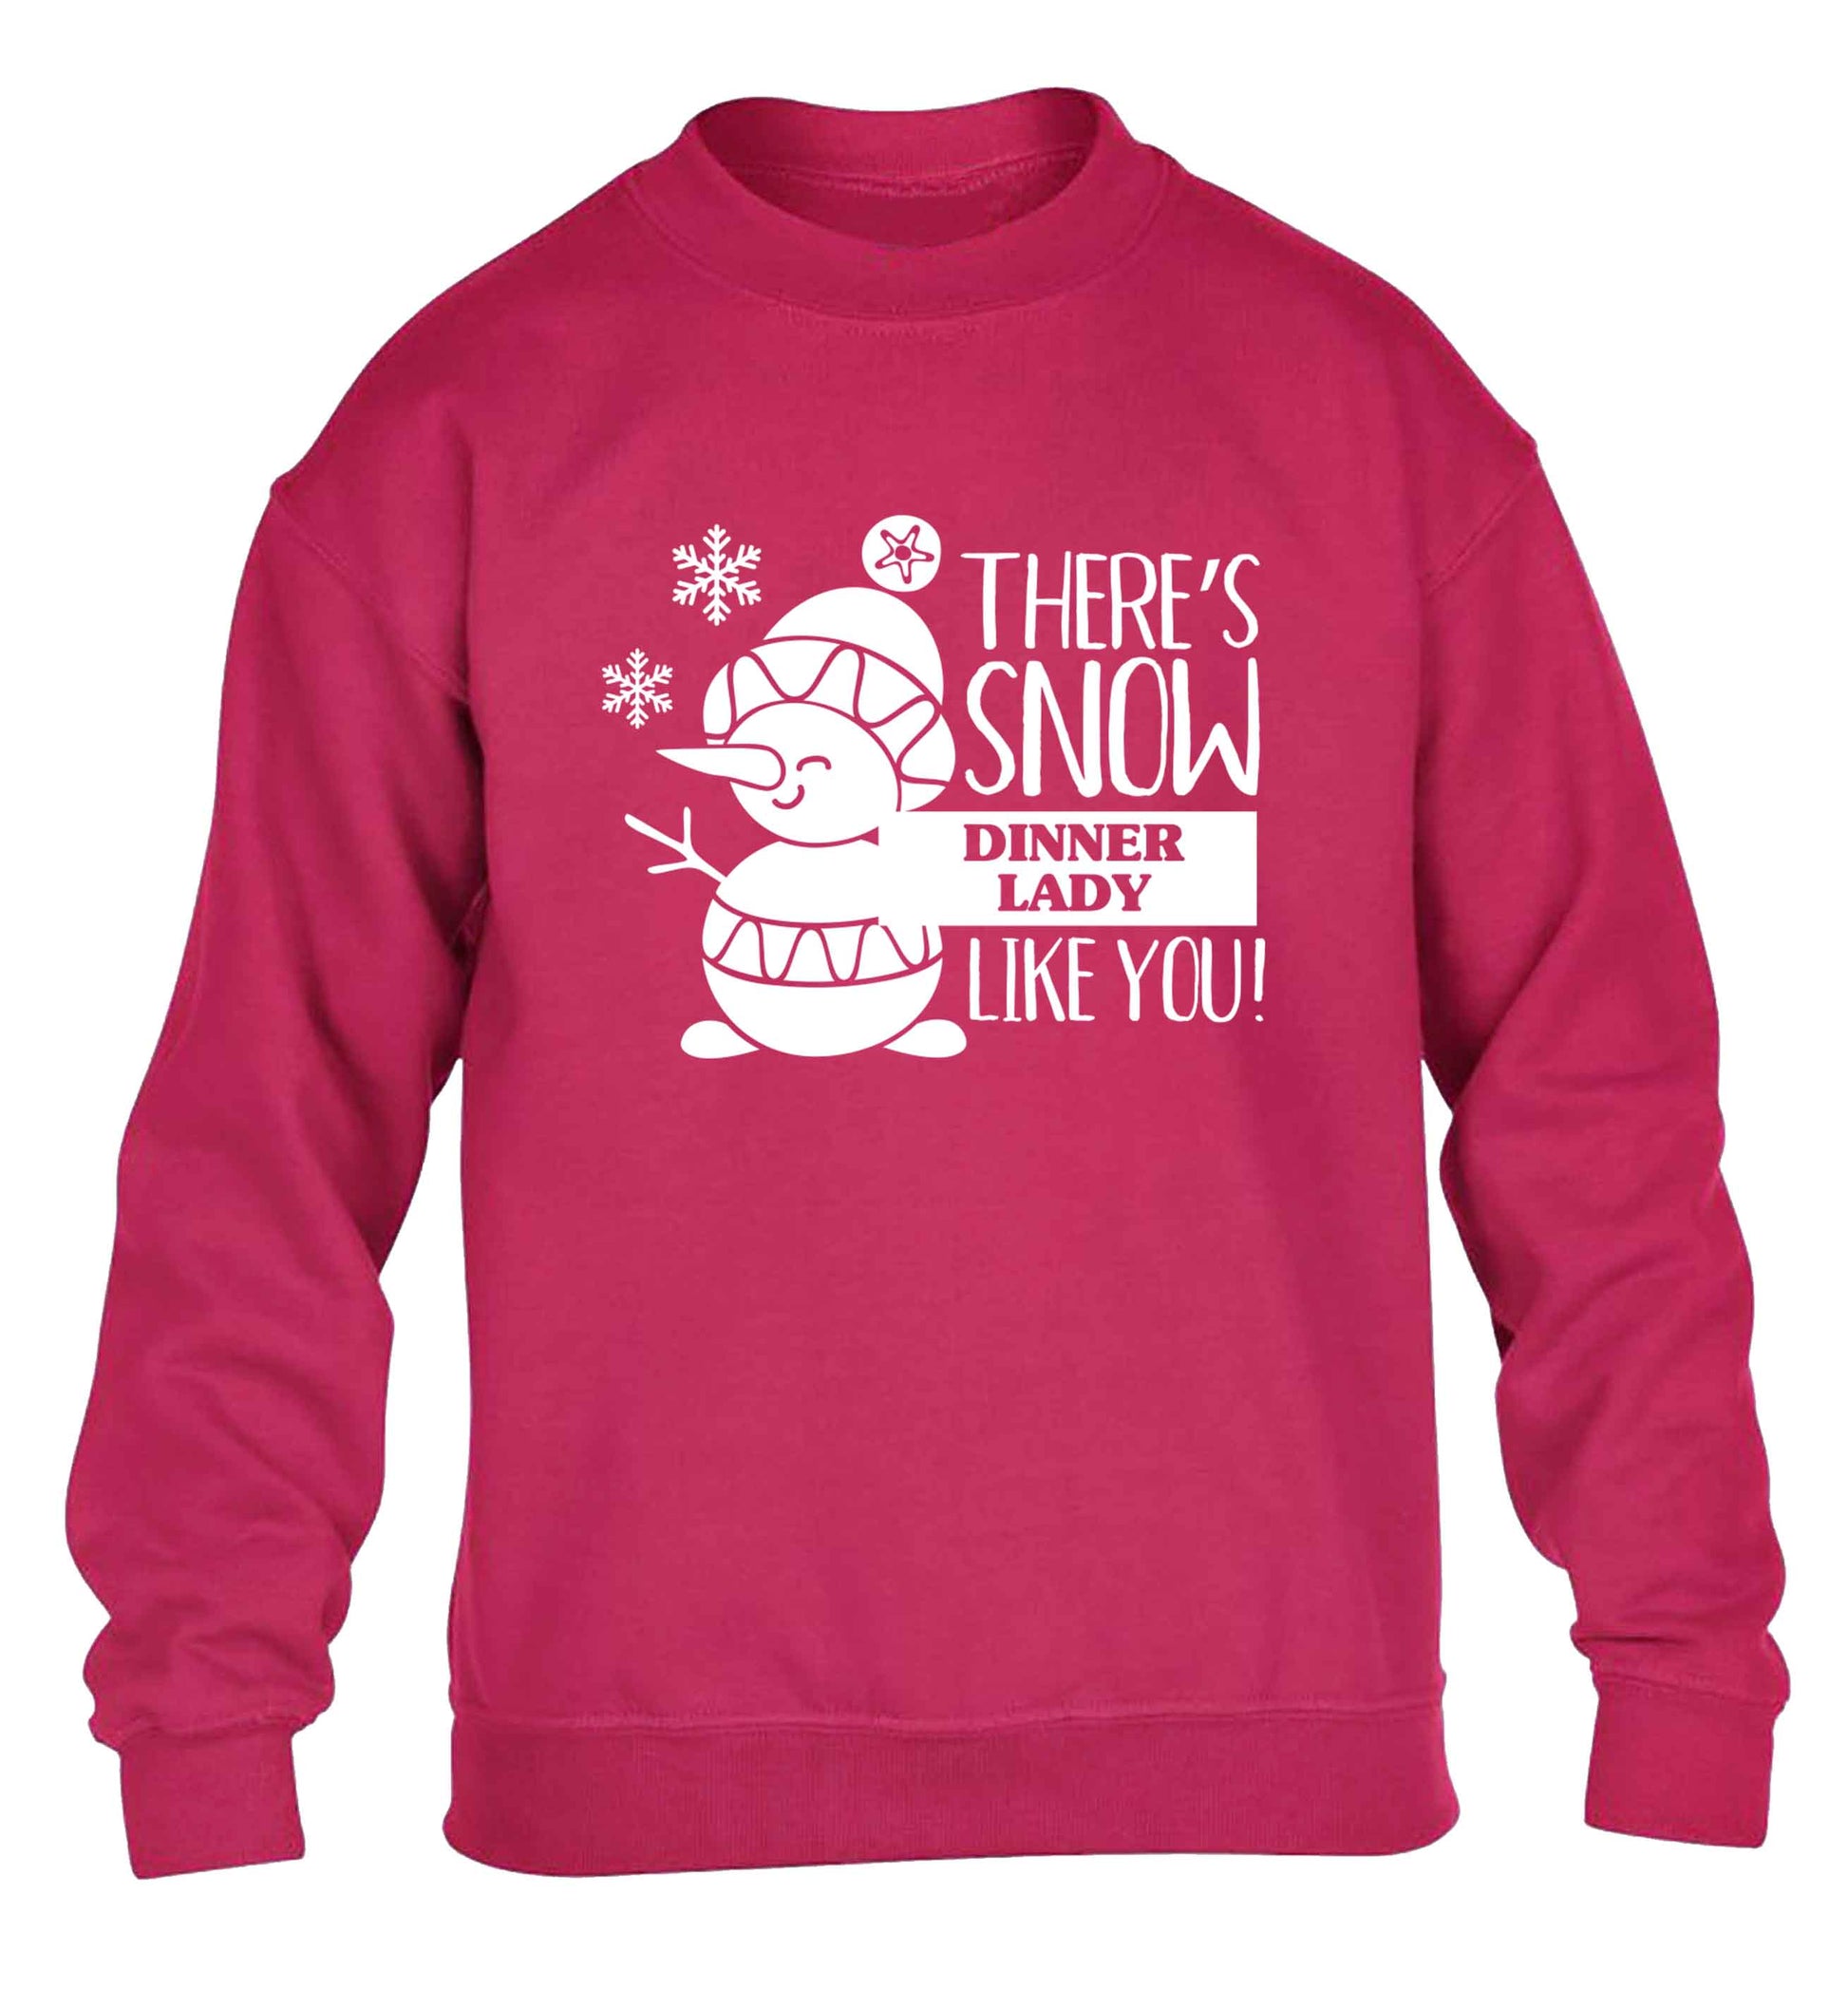 There's snow dinner lady like you children's pink sweater 12-13 Years